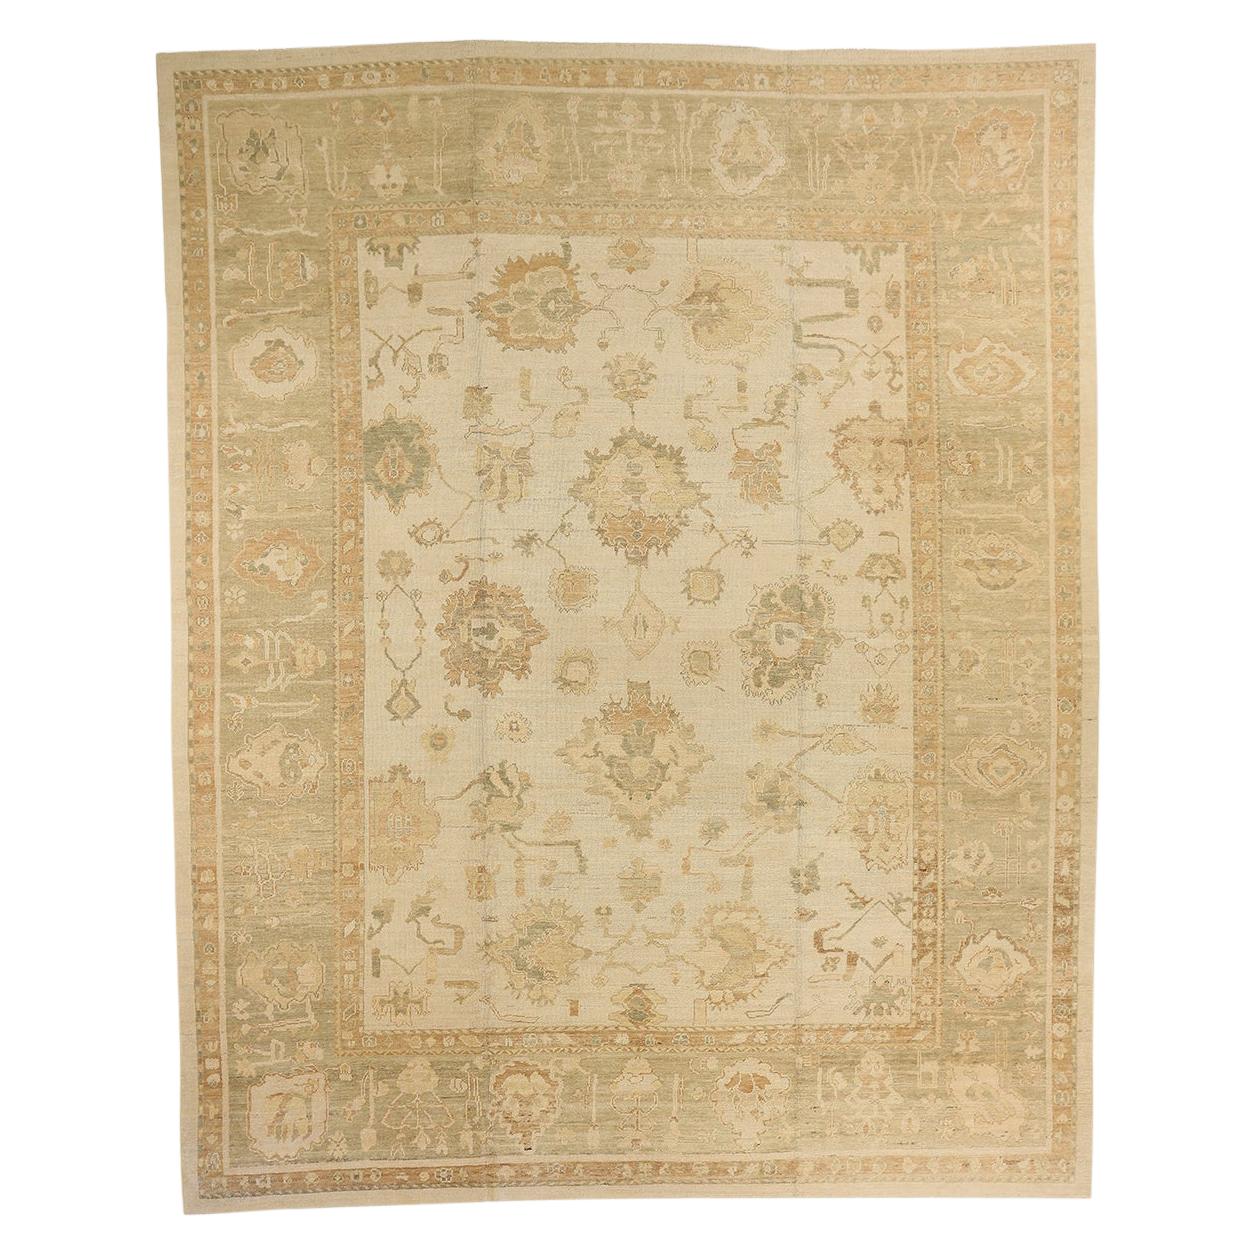 New Oversize Turkish Oushak Rug with Ivory and Beige Floral Field For Sale